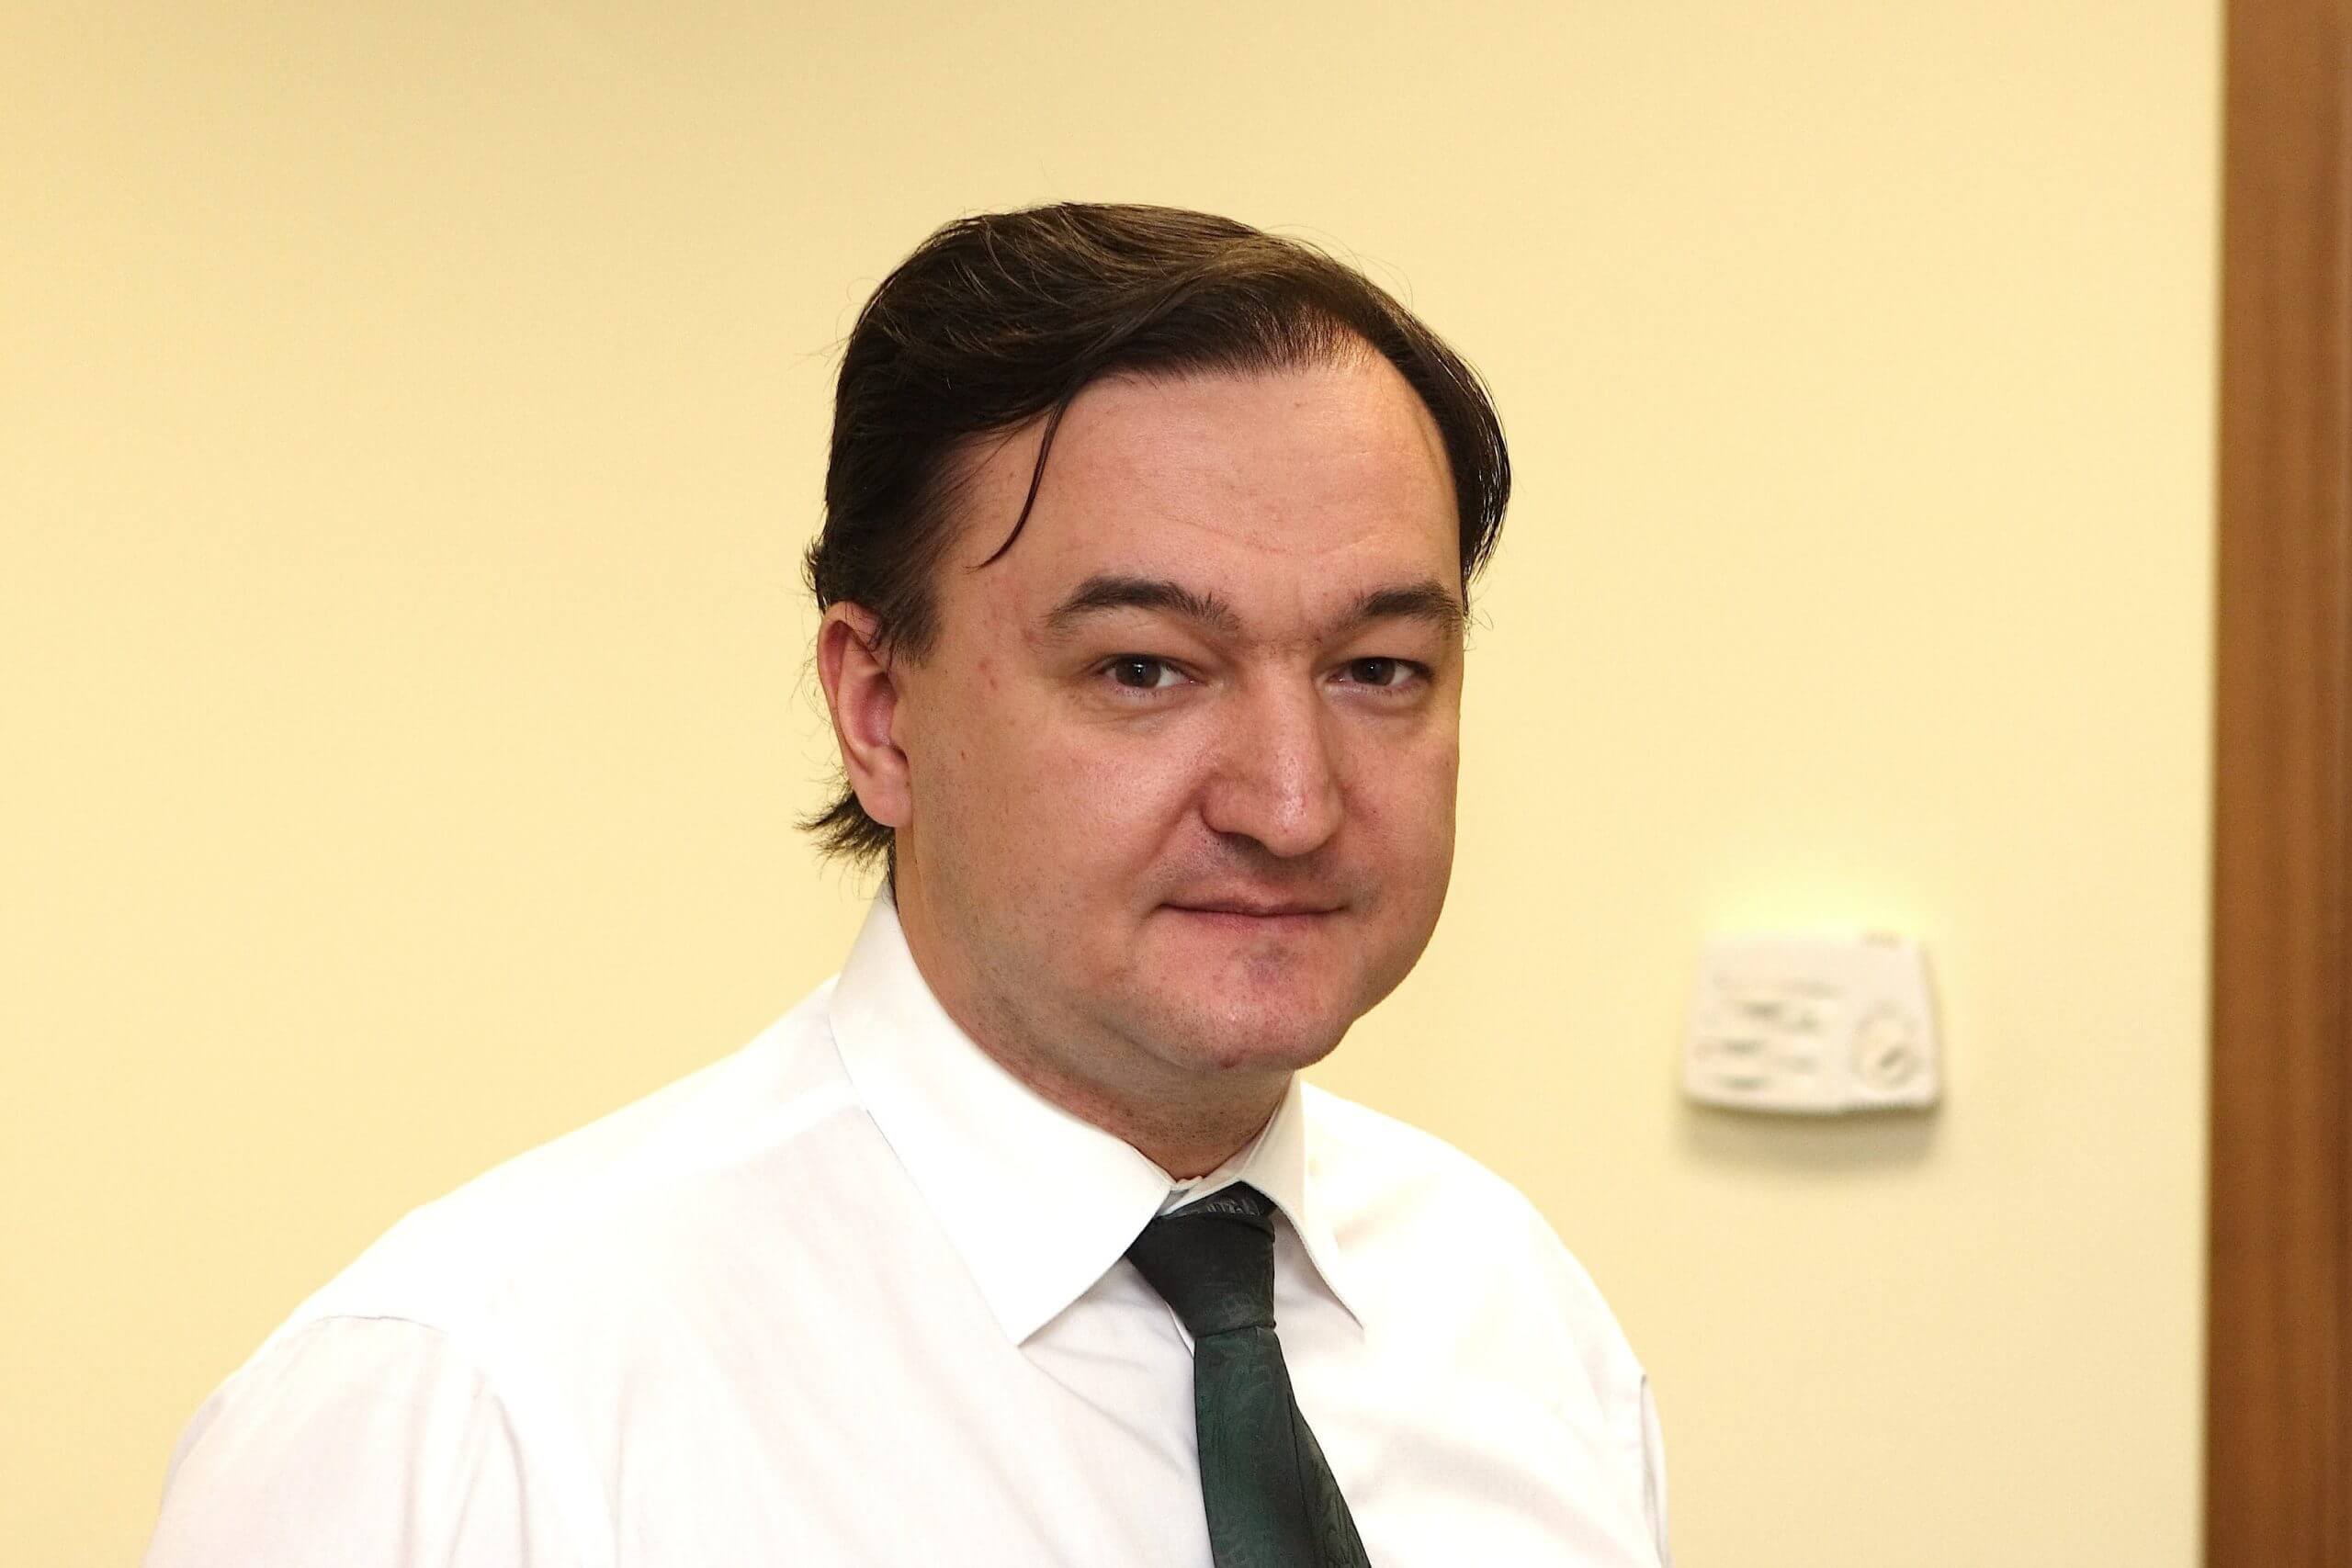 Press Release — HRF Awarded Sergei Magnitsky Human Rights Prize